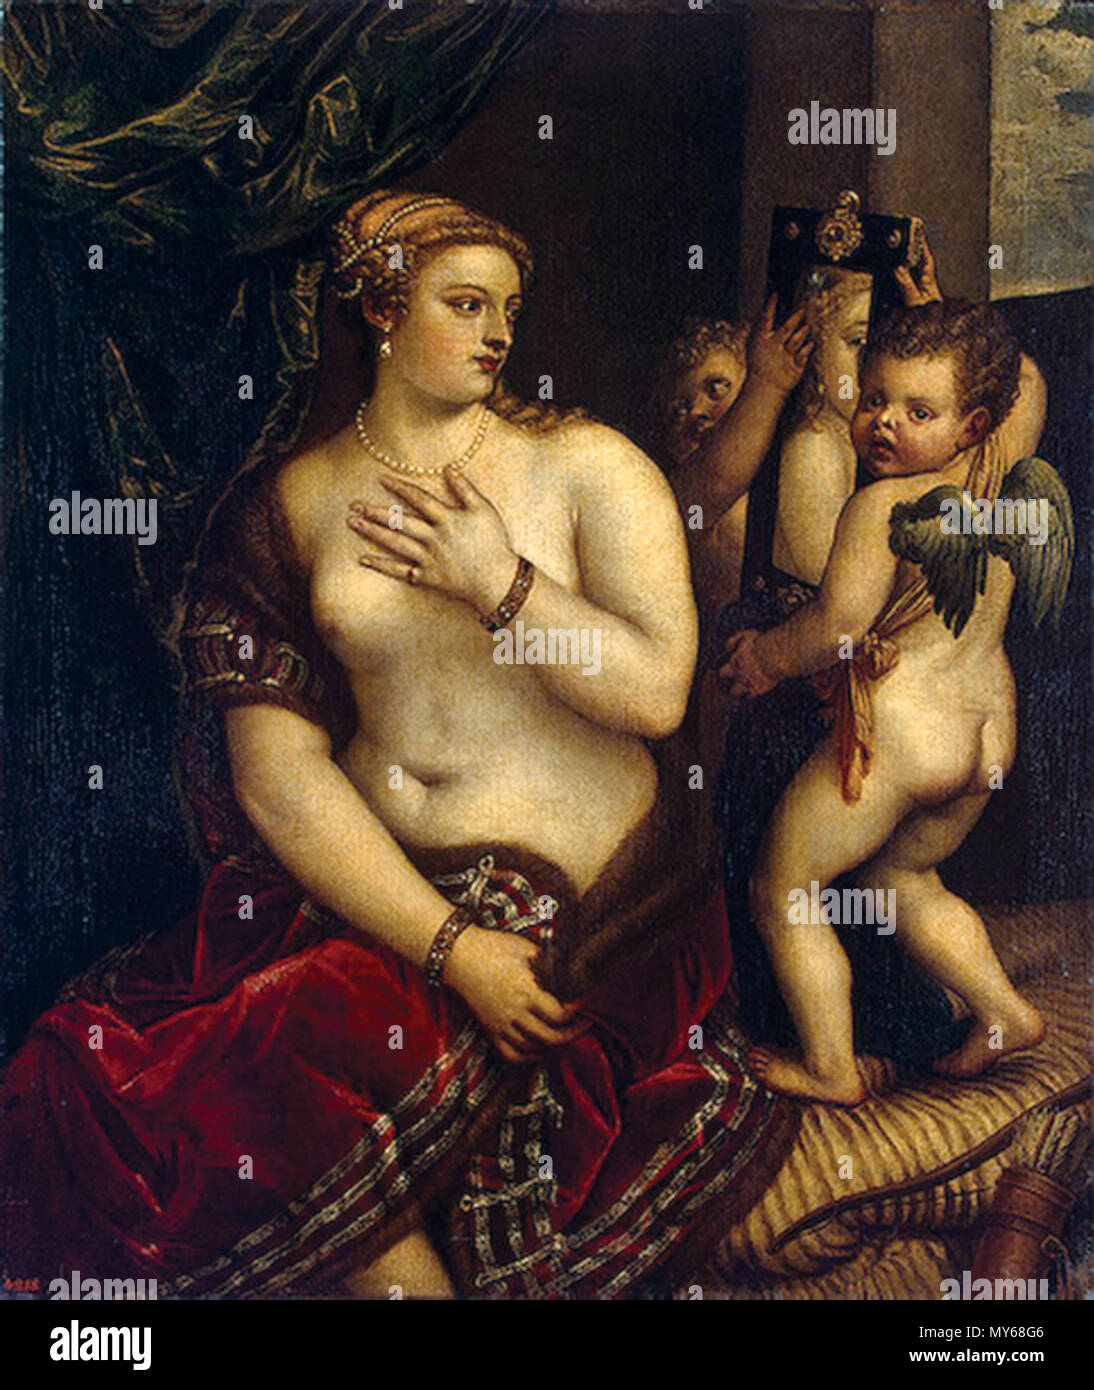 . Venus with a Mirror .  English: Venus with Two Cupids in Front of a Mirror (copy) Workshop Titian Oil on canvas. 130x105 cm Italy. 1560s   Hermitage Museum      Native name Государственный Эрмитаж  Location Saint Petersburg  Coordinates 59° 56′ 26″ N, 30° 18′ 49″ E   Established 1764  Web page hermitagemuseum.org  Authority control  : Q132783 VIAF: 128956287 ISNI: 0000 0001 2285 6617 LCCN: n79100241 NLA: 35139924 GND: 2124053-X WorldCat    provenance: Collection of Empress Josephine, Malmaison. 1815 Русский: Венера с двумя амурами перед зеркалом (копия) Мастерская Тициан Холст, масло. 130x10 Stock Photo